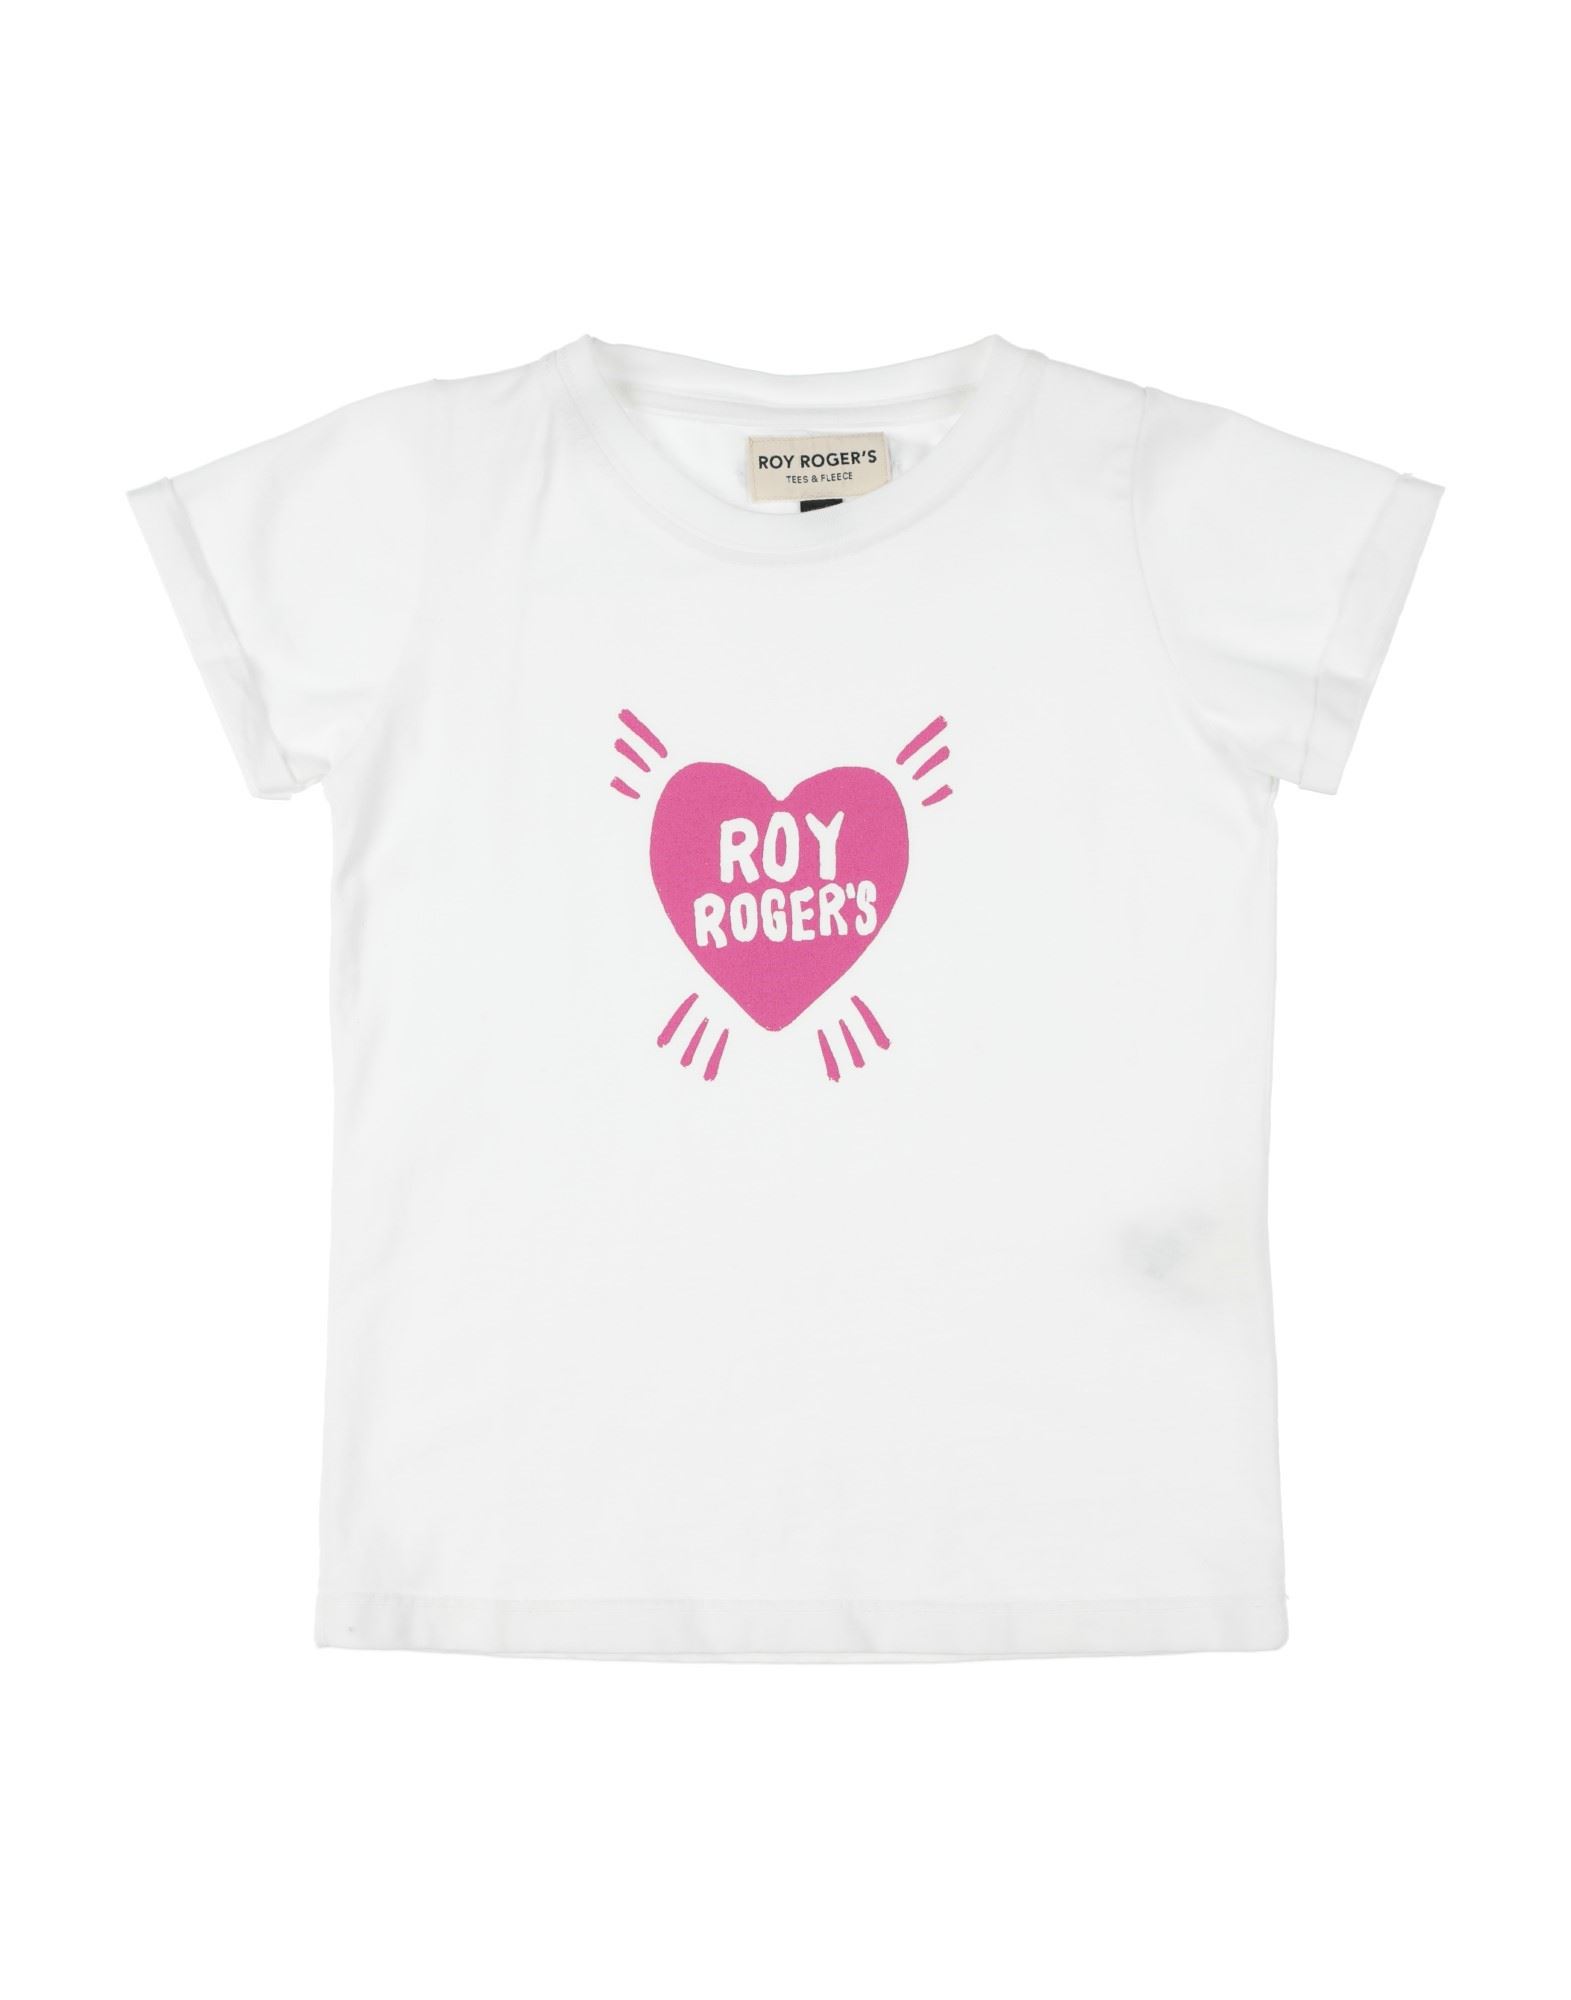 Roy Rogers Kids' Roÿ Roger's Toddler Girl T-shirt White Size 6 Cotton